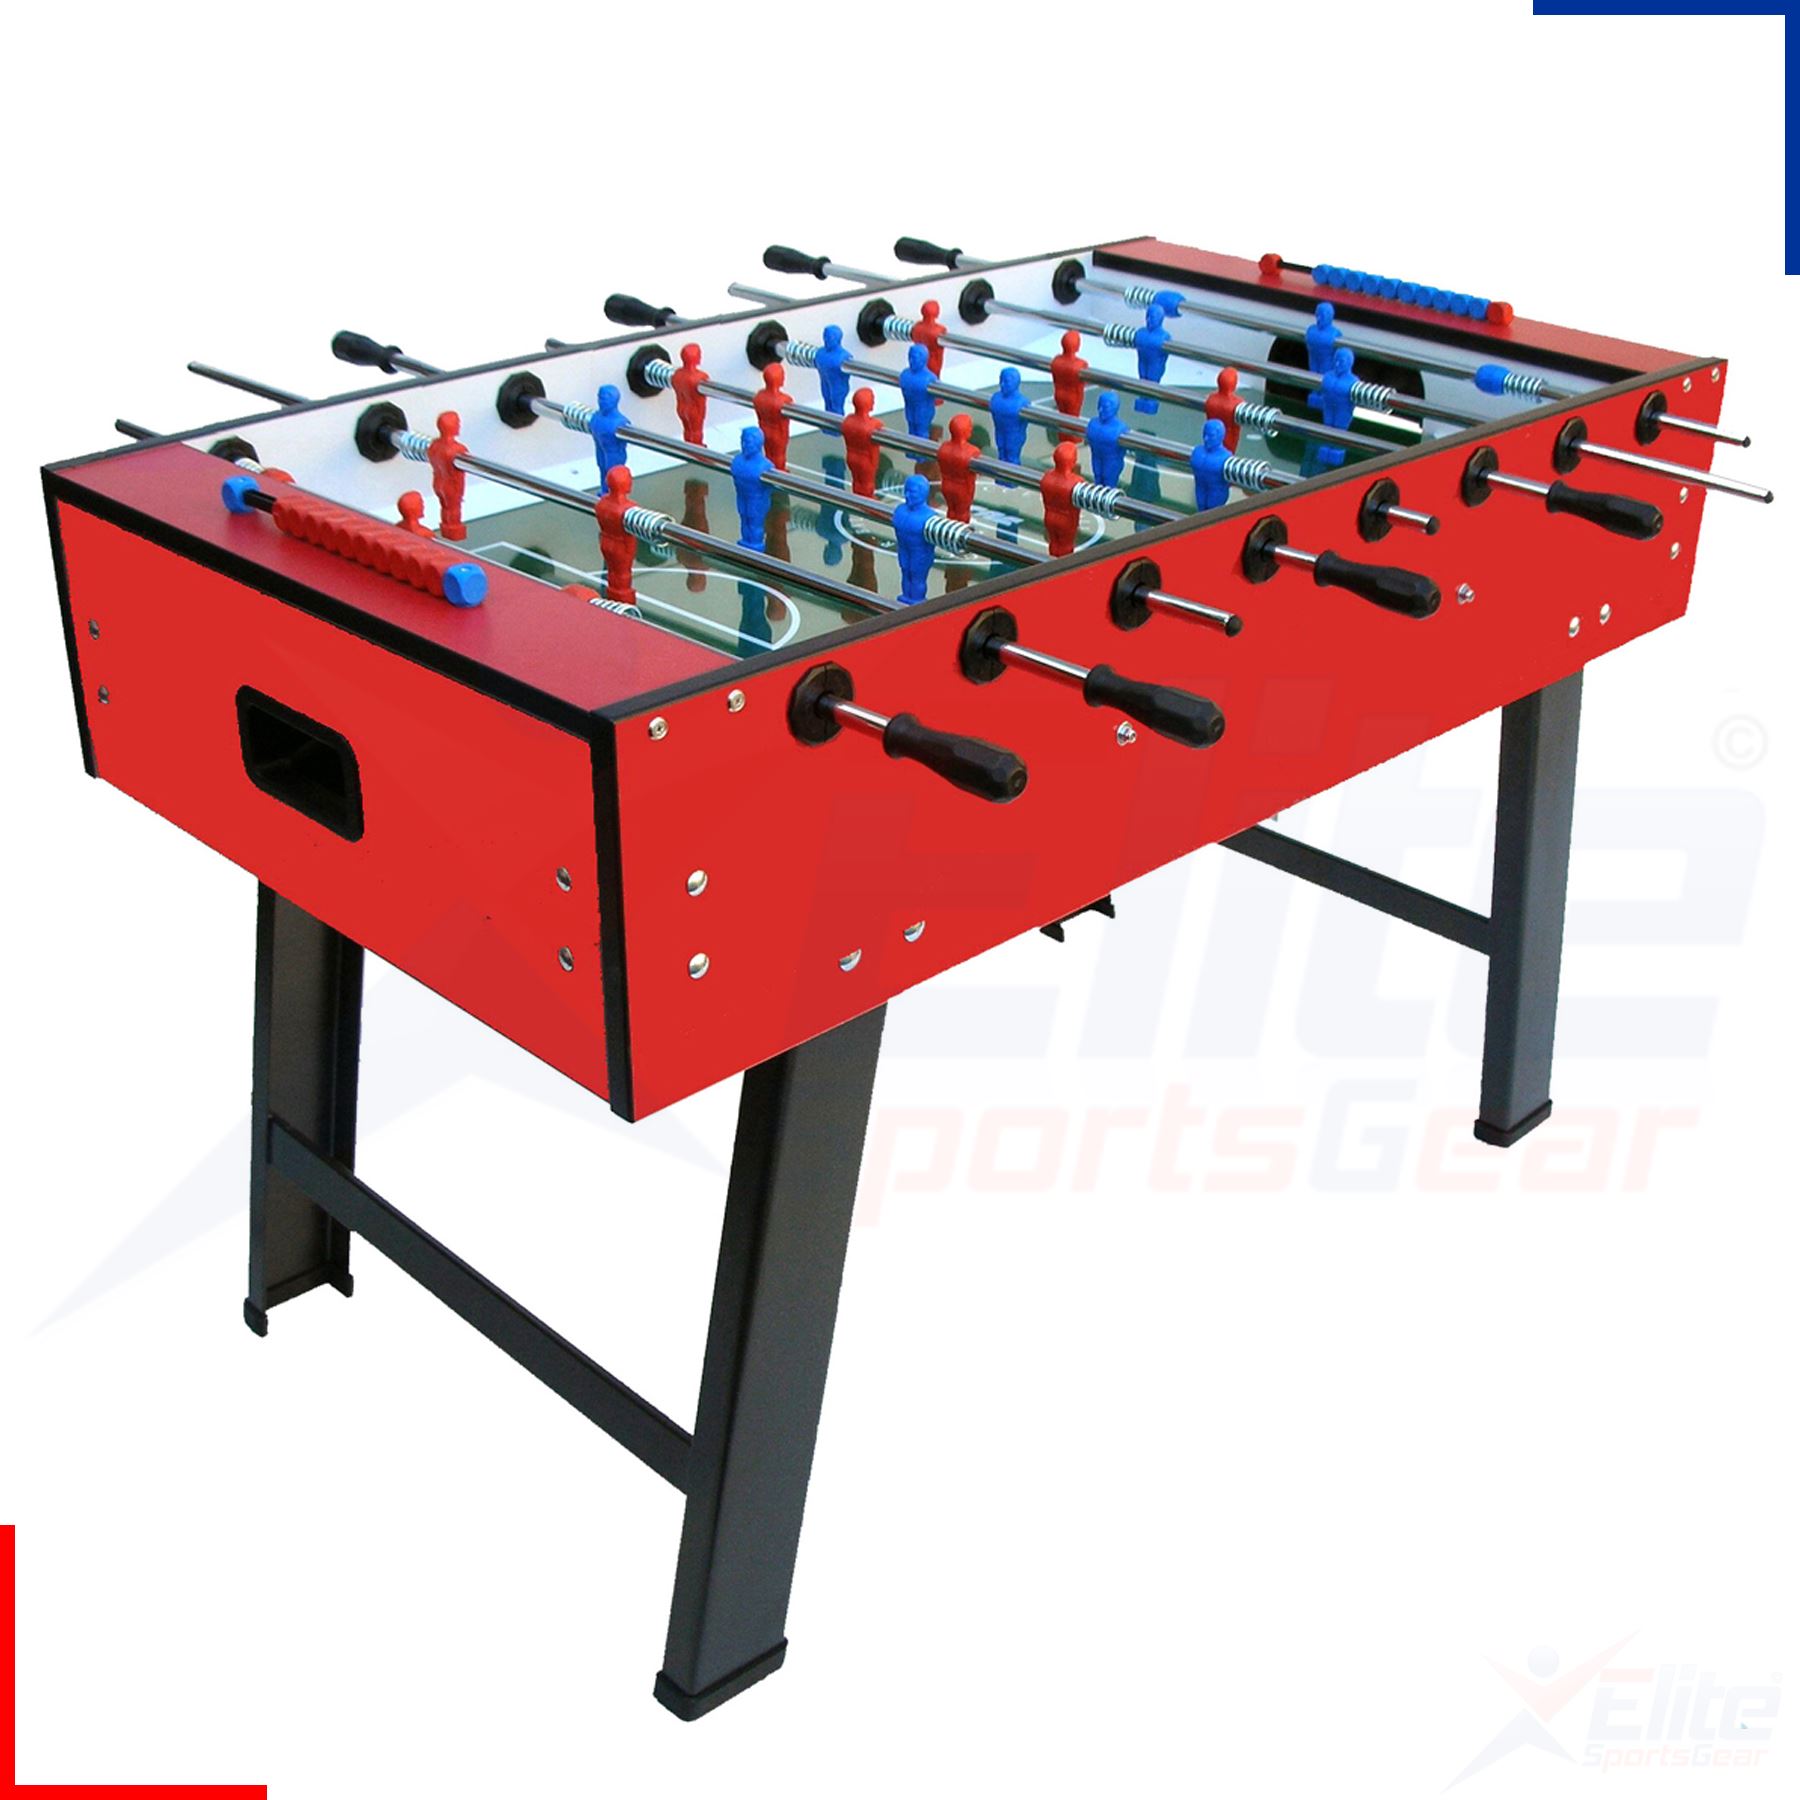 FAS Smile Football Pub Games Soccer Table With Telescopic Poles ...